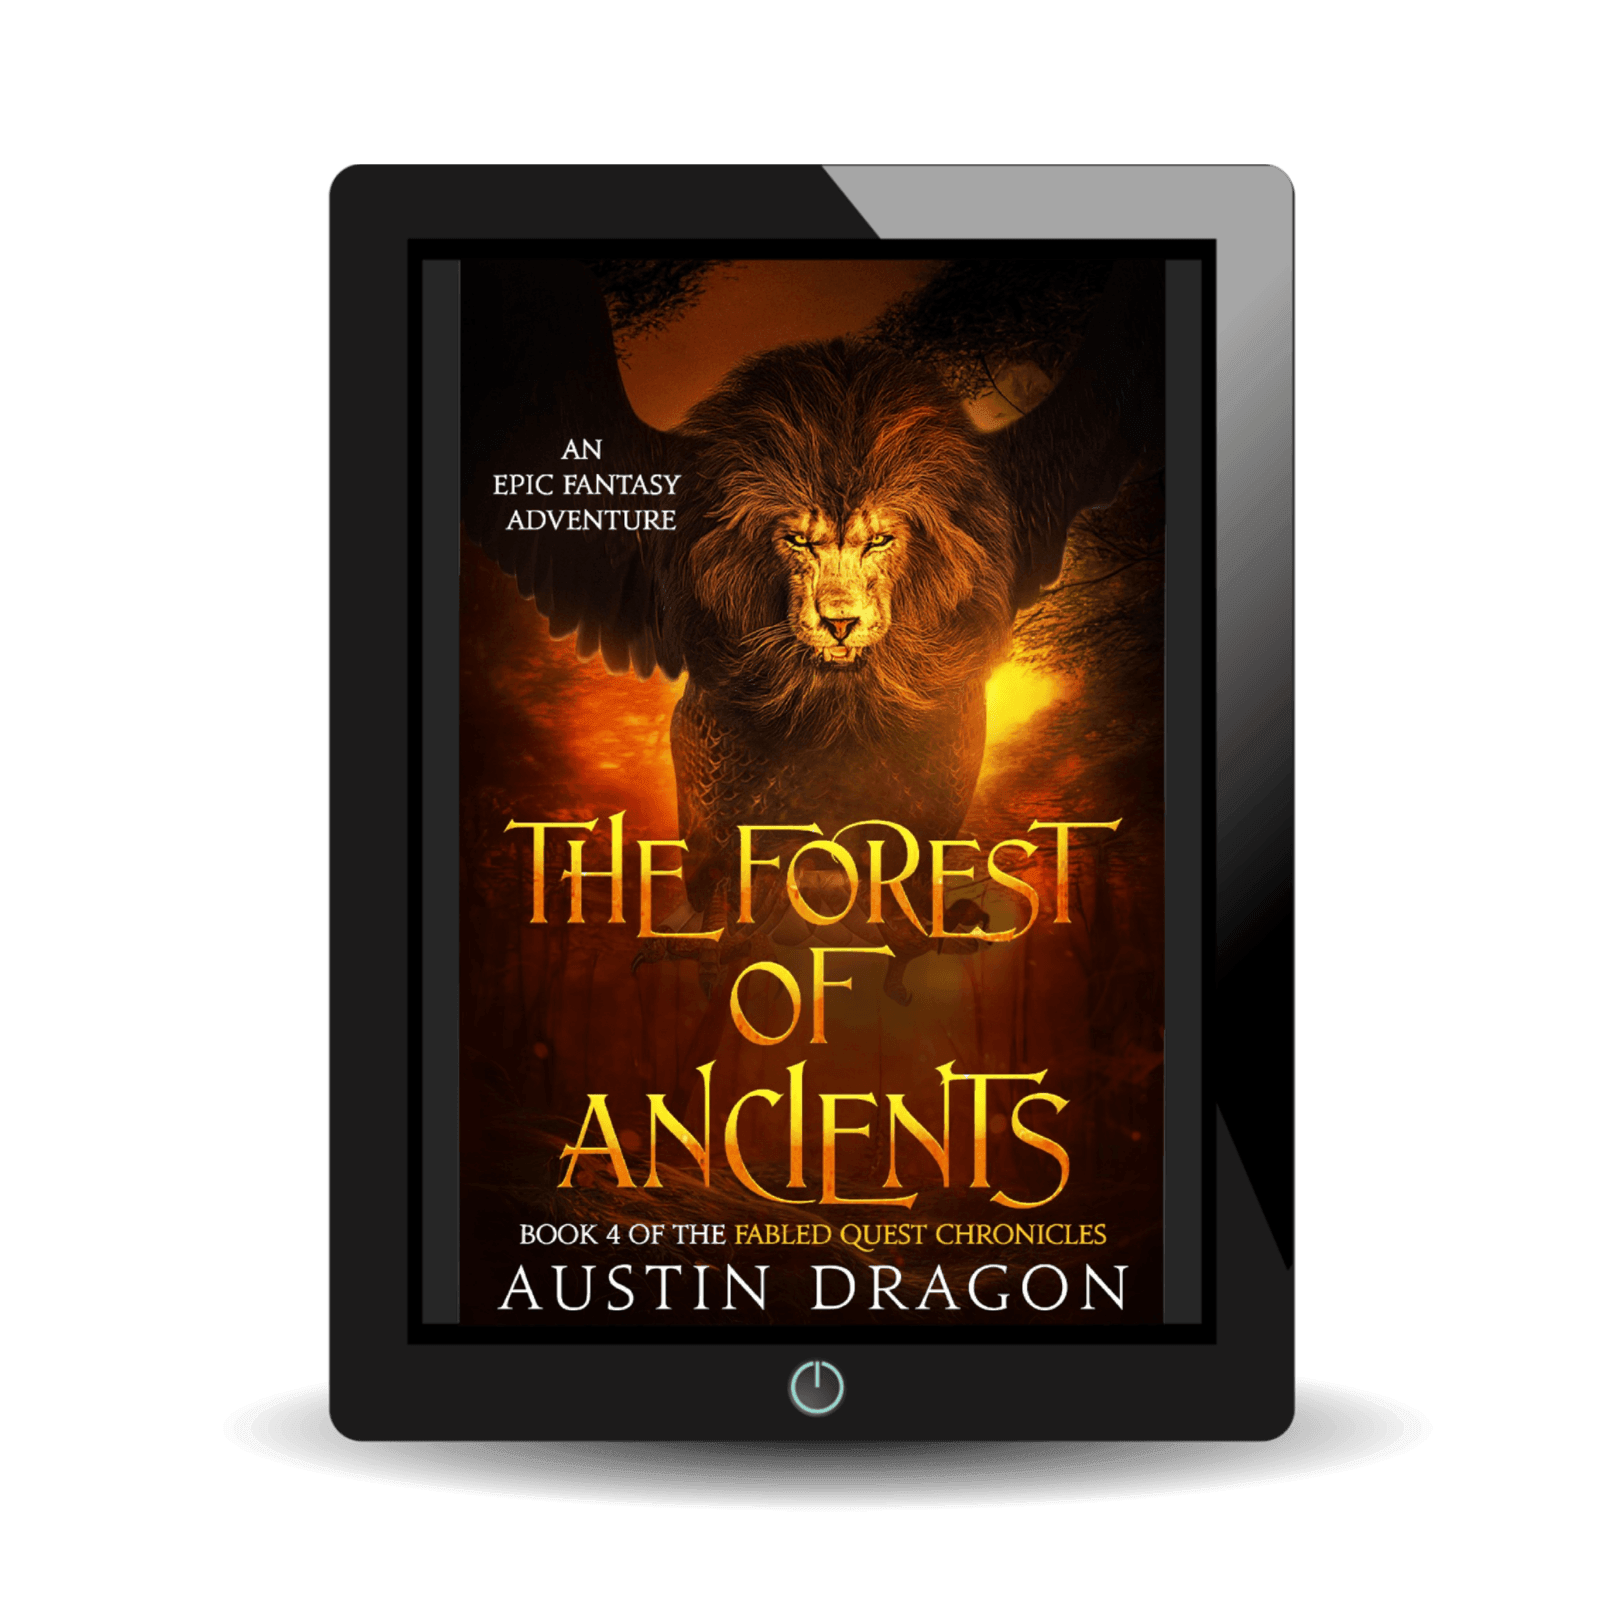 The Forest of Ancients (Fabled Quest Chronicles, Book 4) Ebook